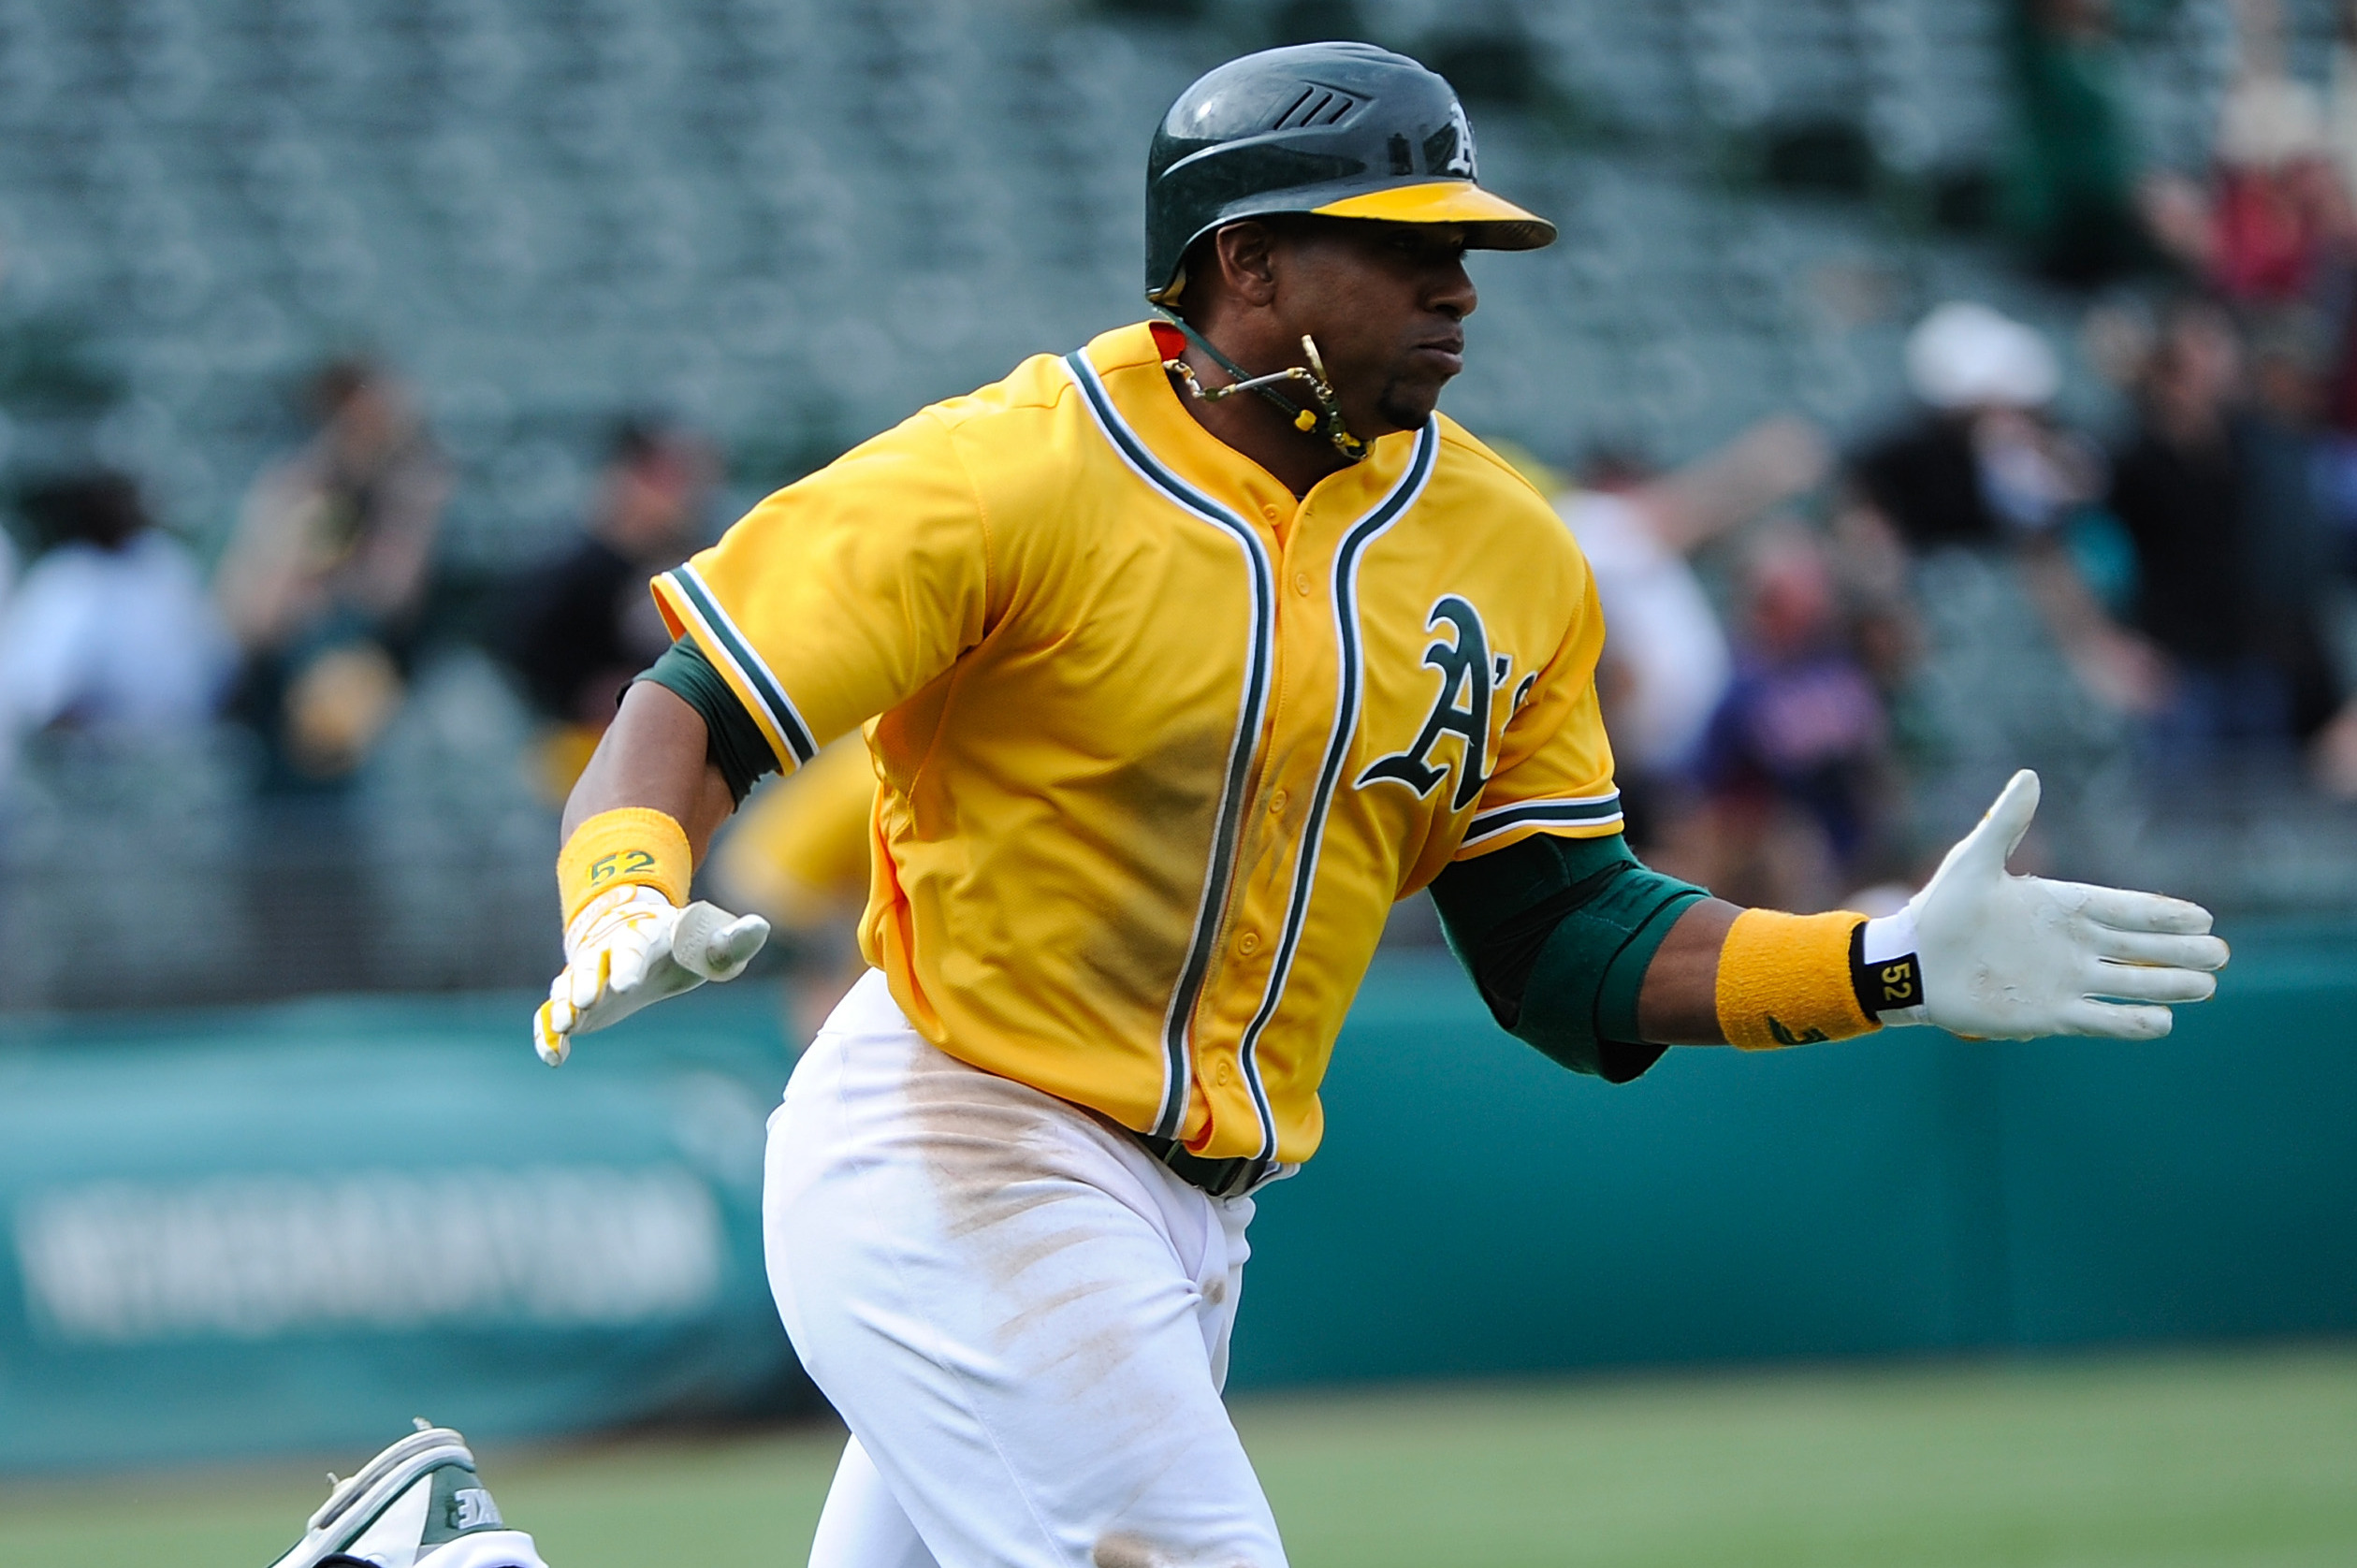 Oakland A's: Yoenis Cespedes Living Up to Contract by Being A's